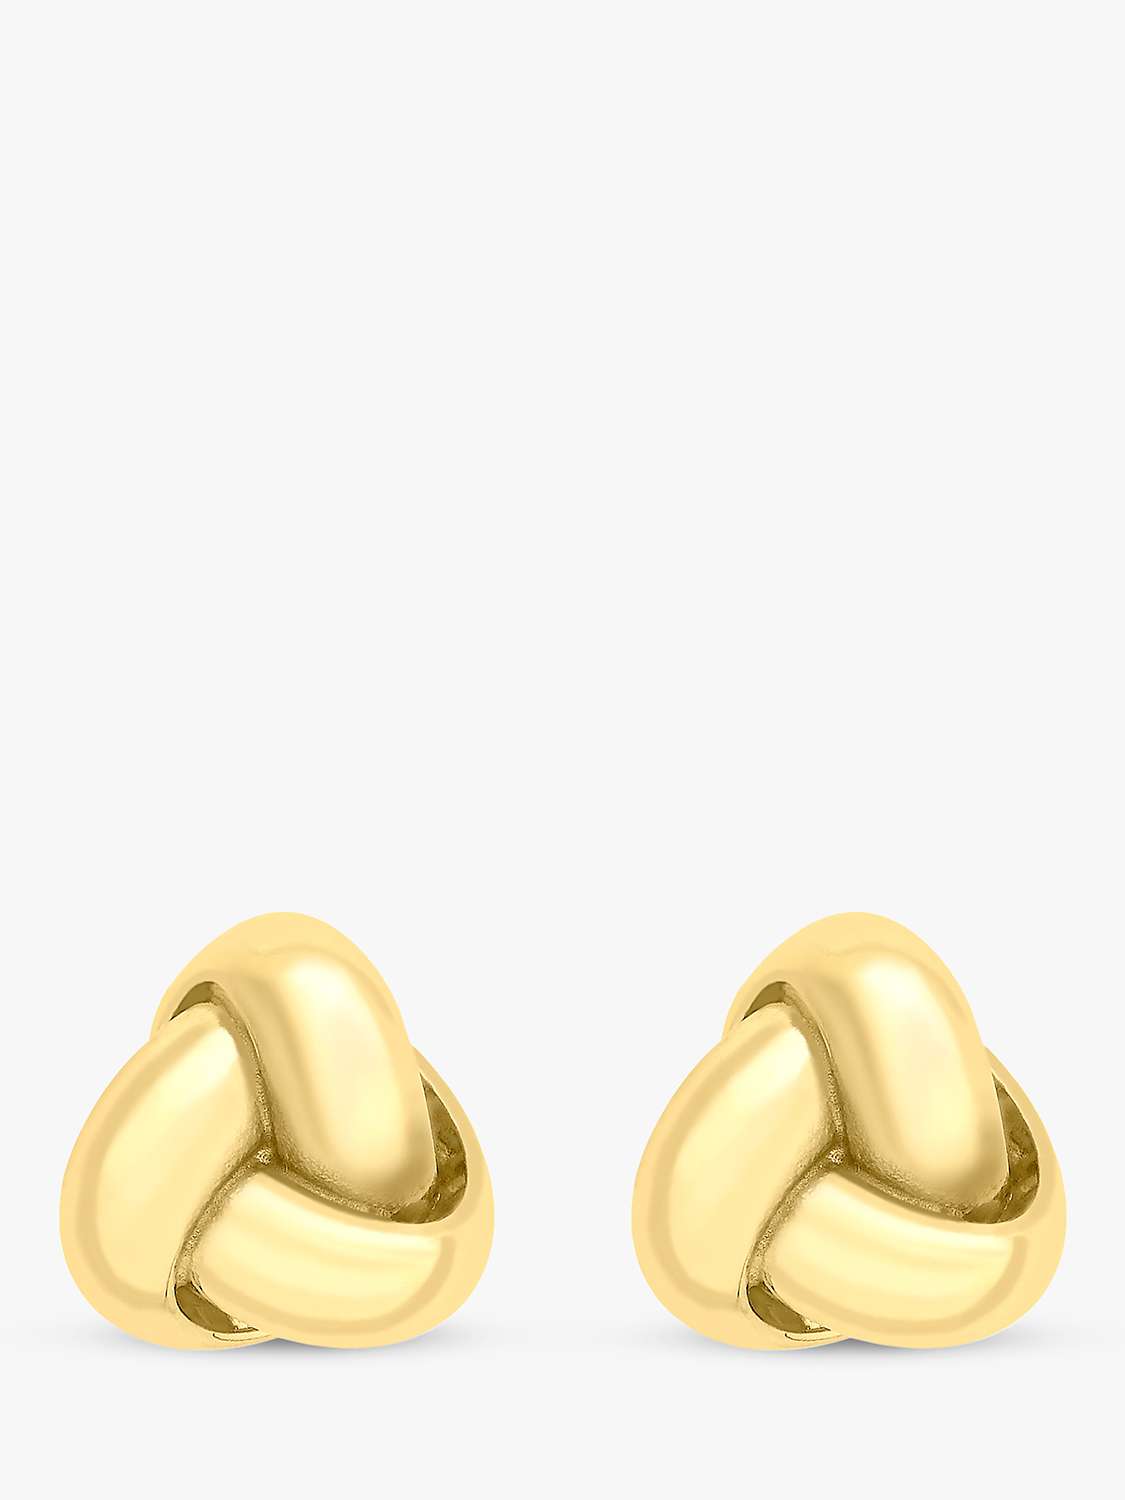 Buy IBB 9ct Gold Knot Stud Earrings, Gold Online at johnlewis.com